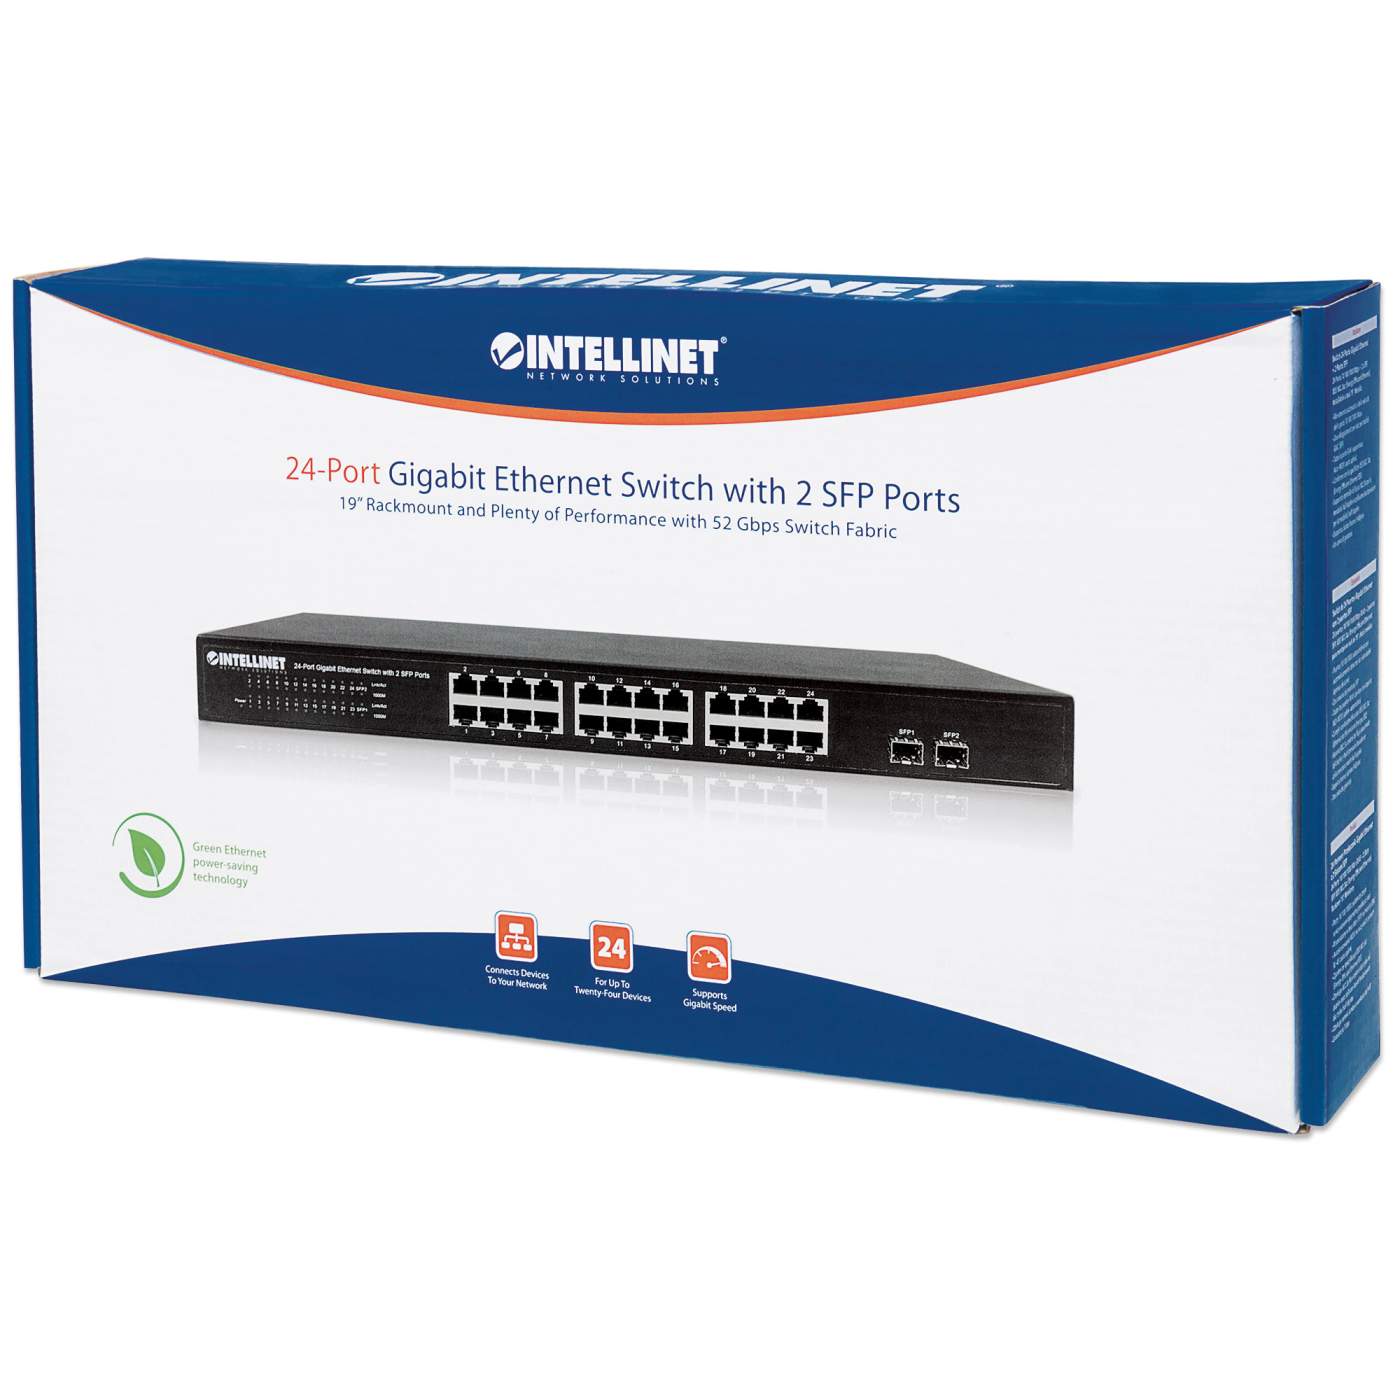 24-Port Gigabit Ethernet Switch with 2 SFP Ports Packaging Image 2